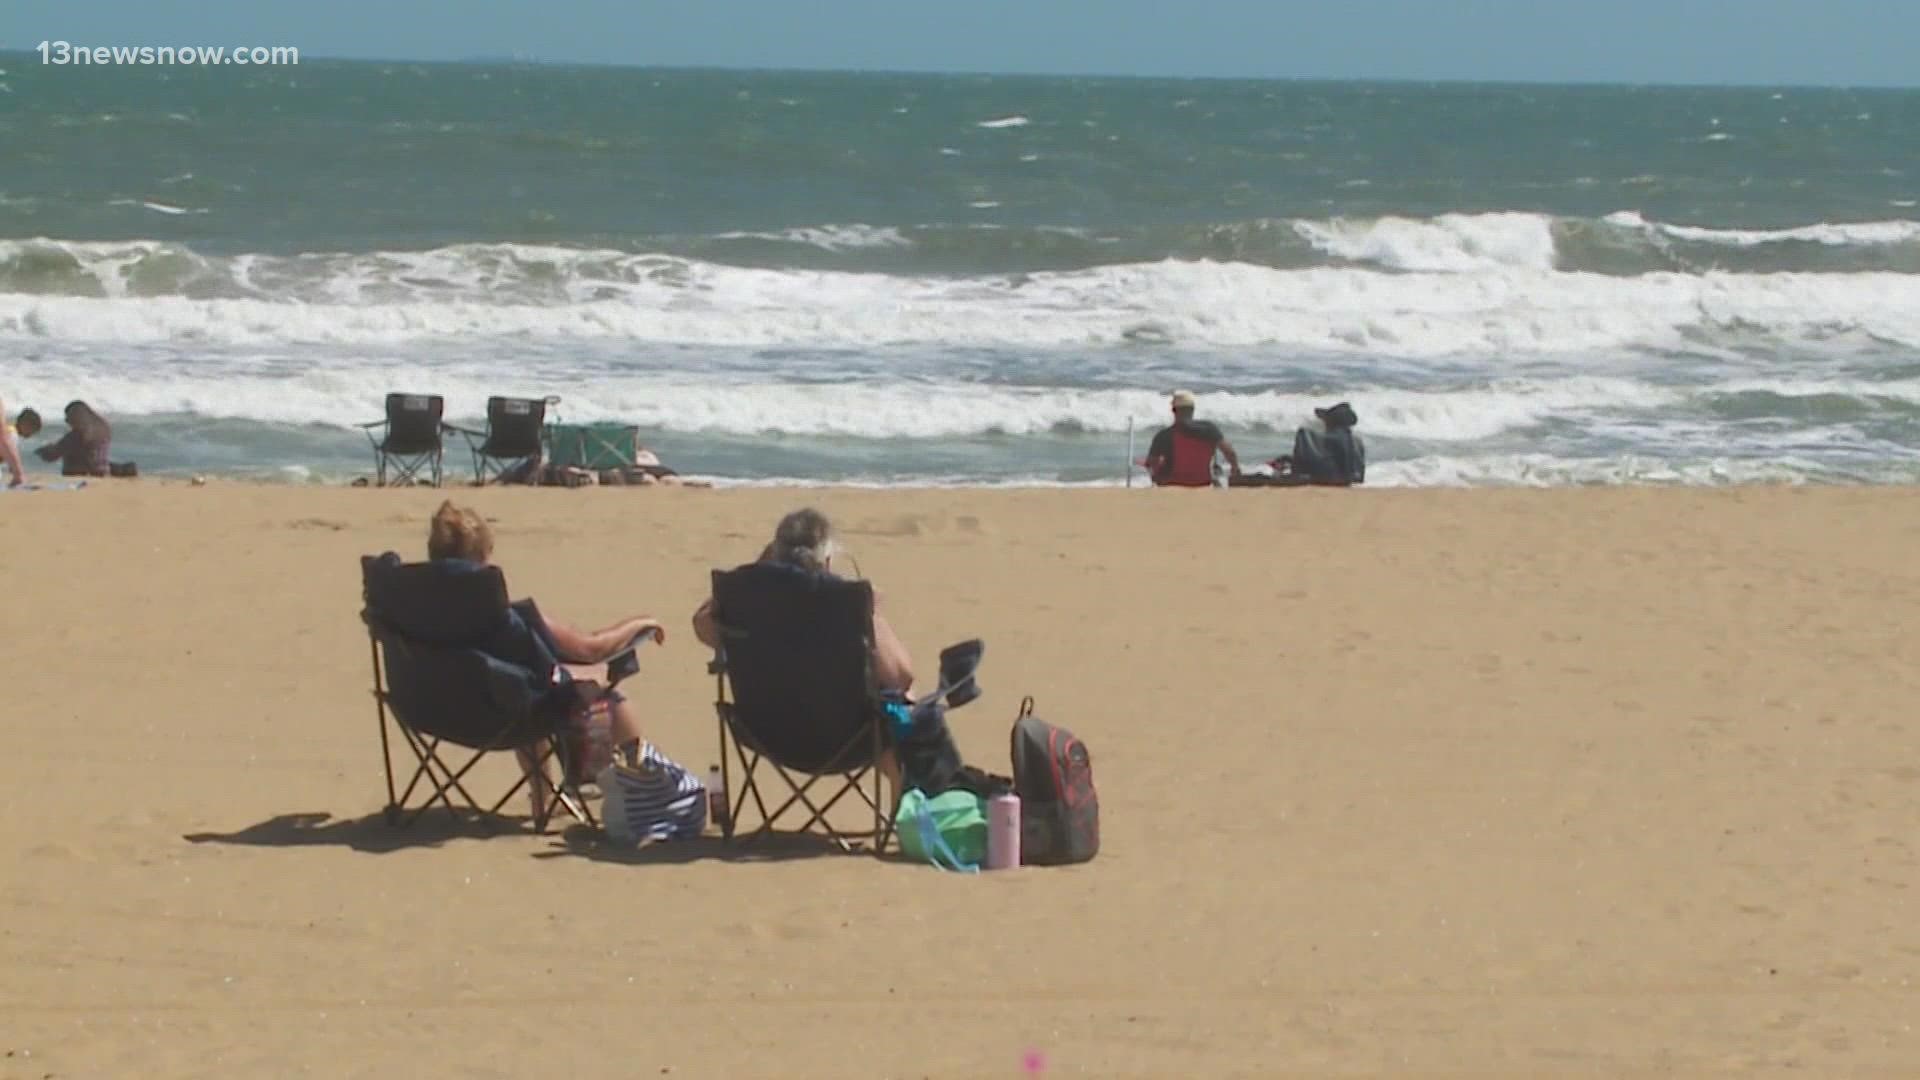 The red flags mean beachgoers should not go swimming in the water, because there's been an increase in rip currents.